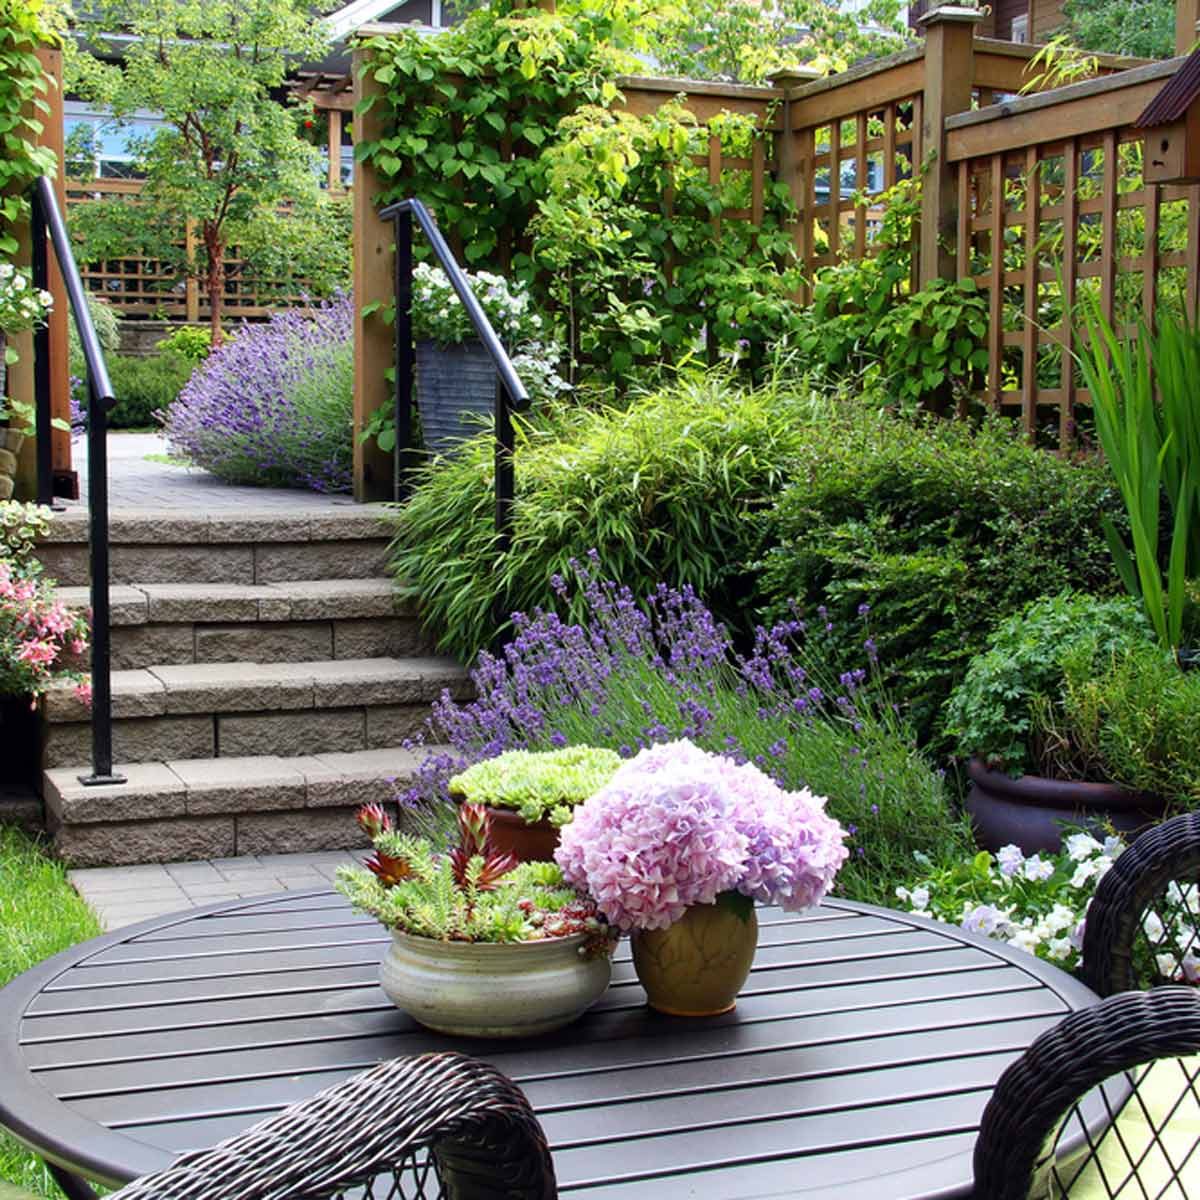 14 Small Yard Landscaping Ideas to Impress - Shutterstock 442164886